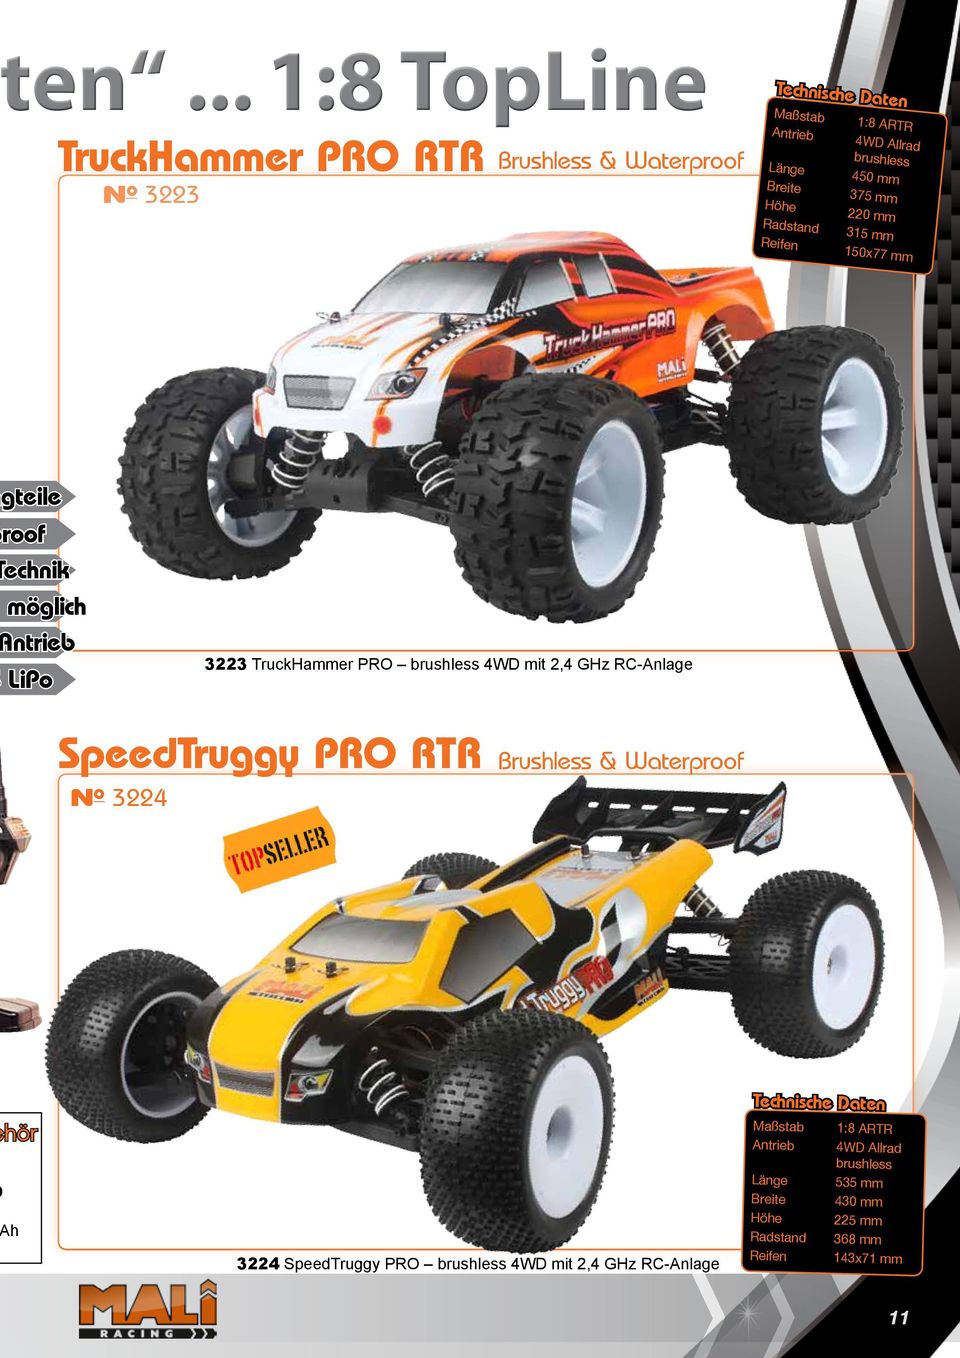 4WD mit 2,4 GHz RC-Anlage SpeedTruggy PRO RTR Brushless & Waterproof N o 3224 hör h 3224 SpeedTruggy PRO brushless 4WD